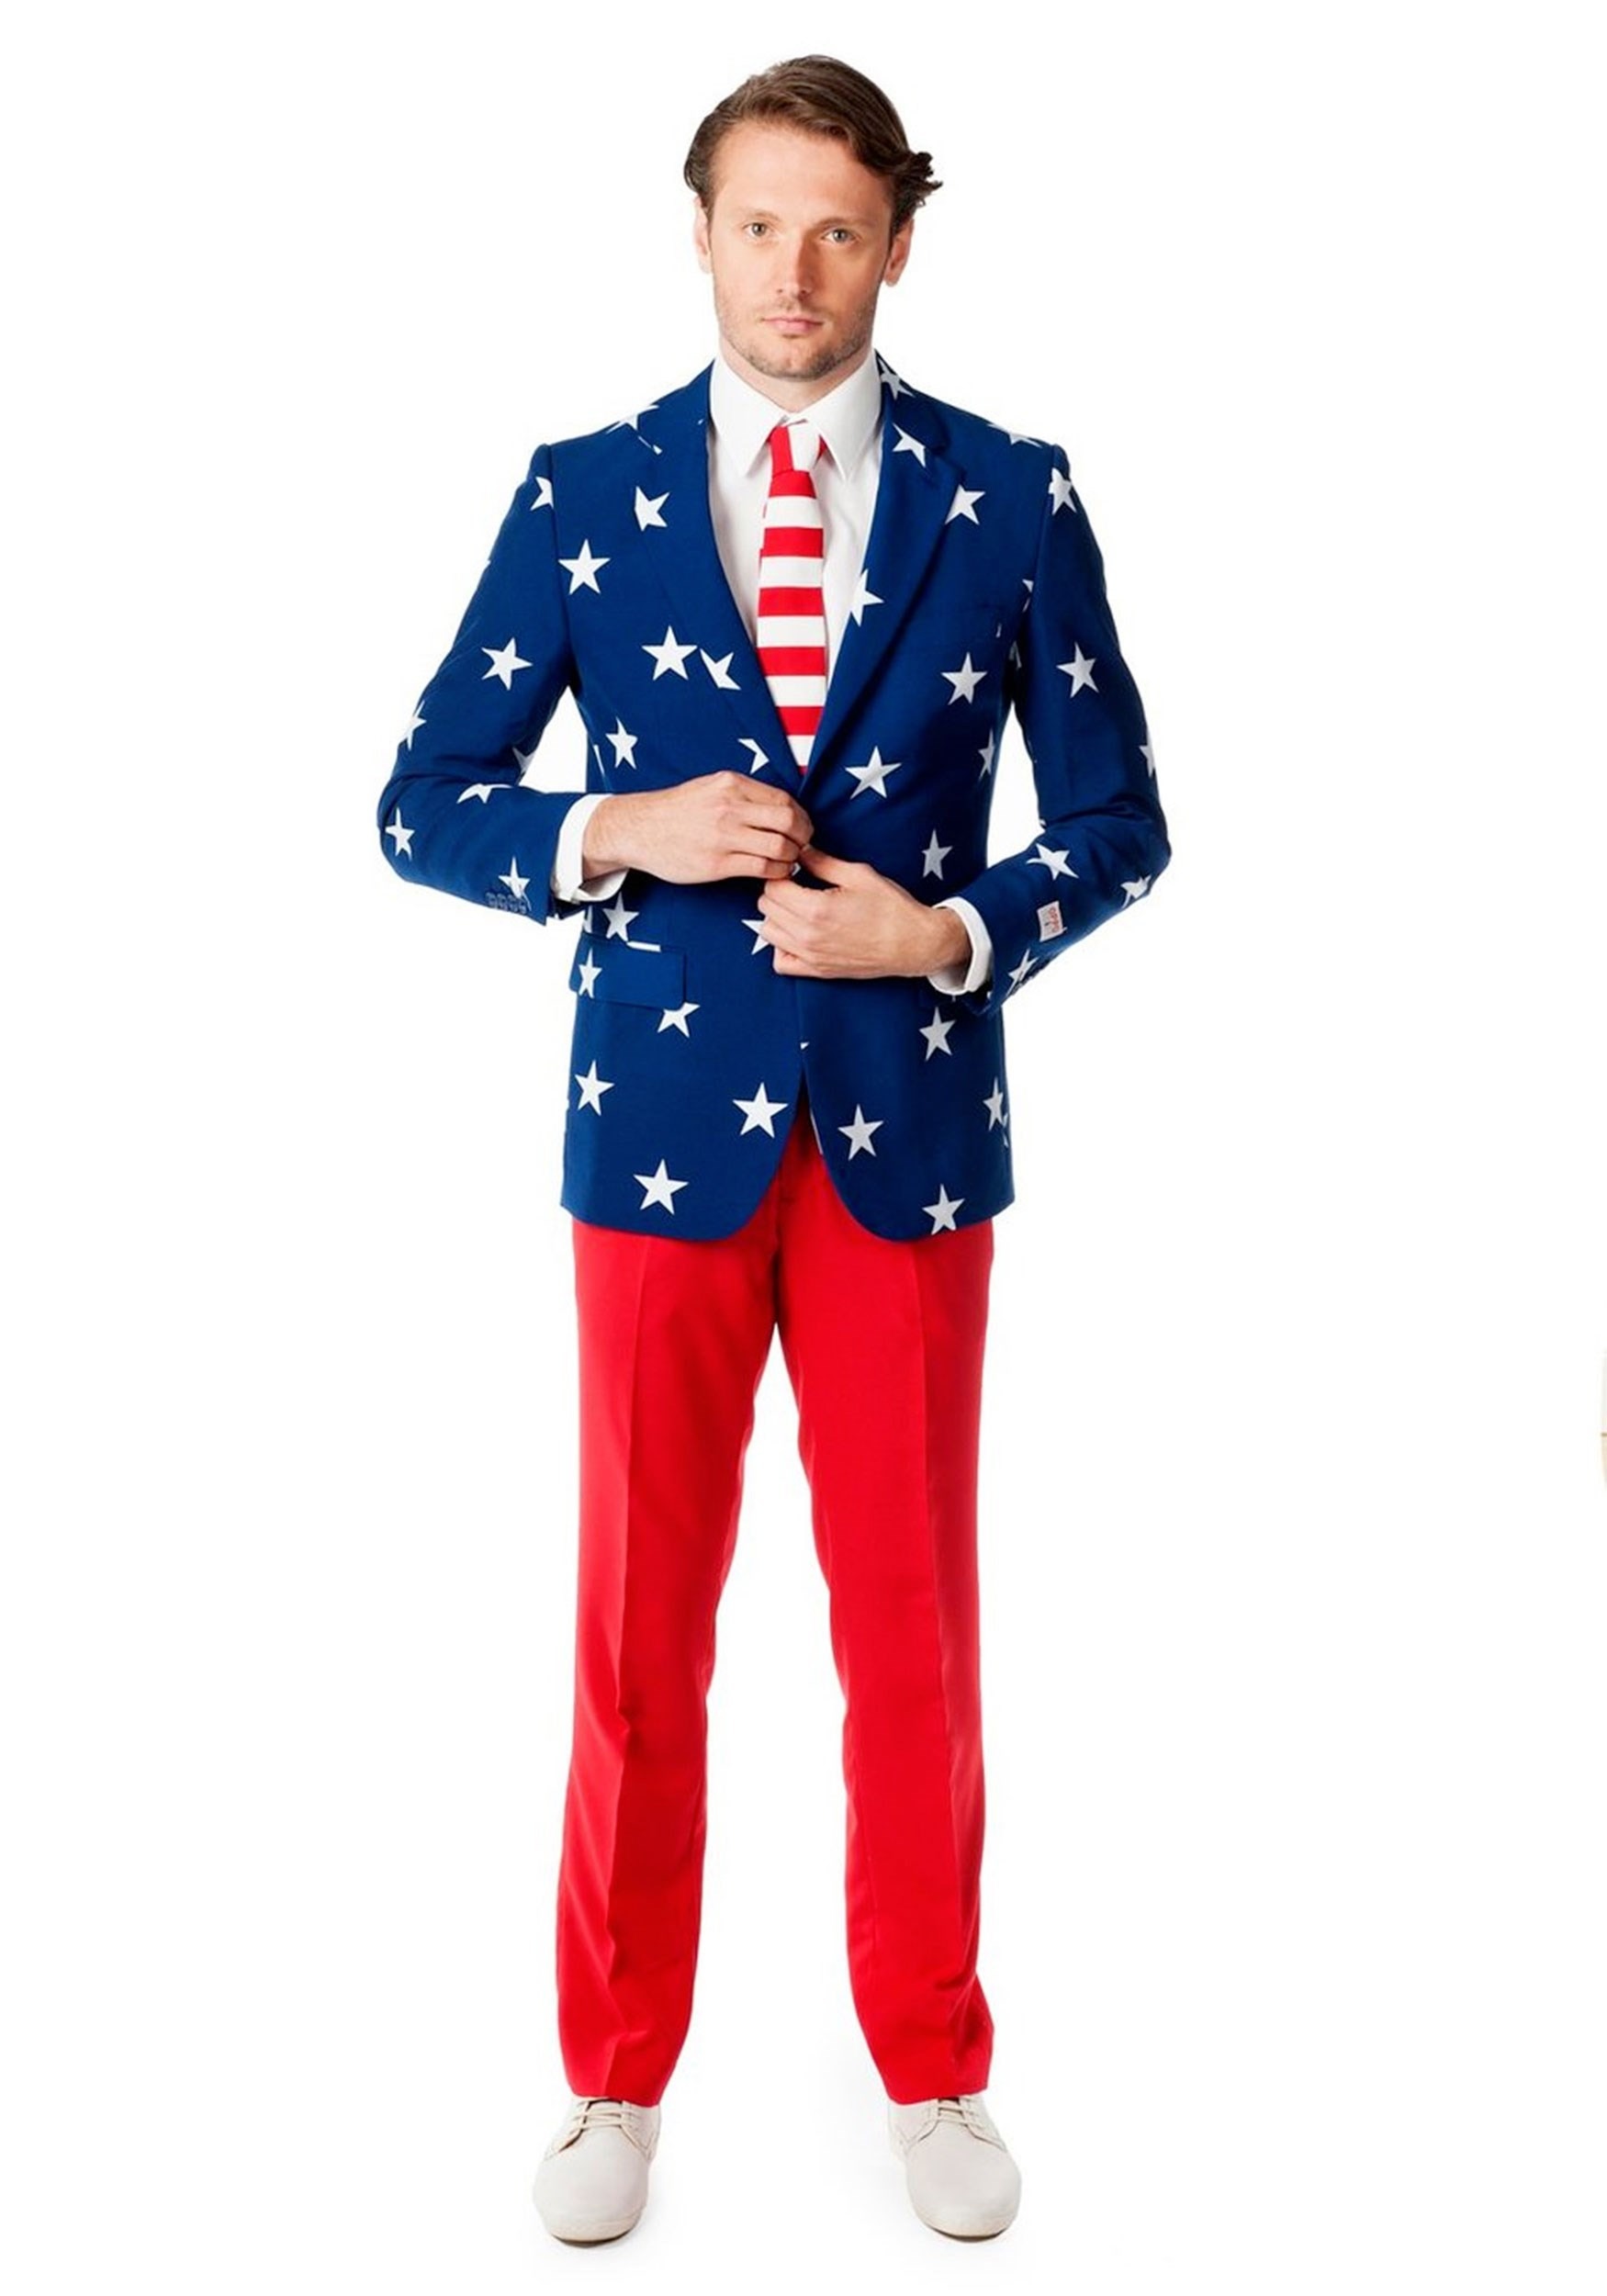 Image of OppoSuits Stars and Stripes Men's Costume Suit ID OSOSUI0023-40